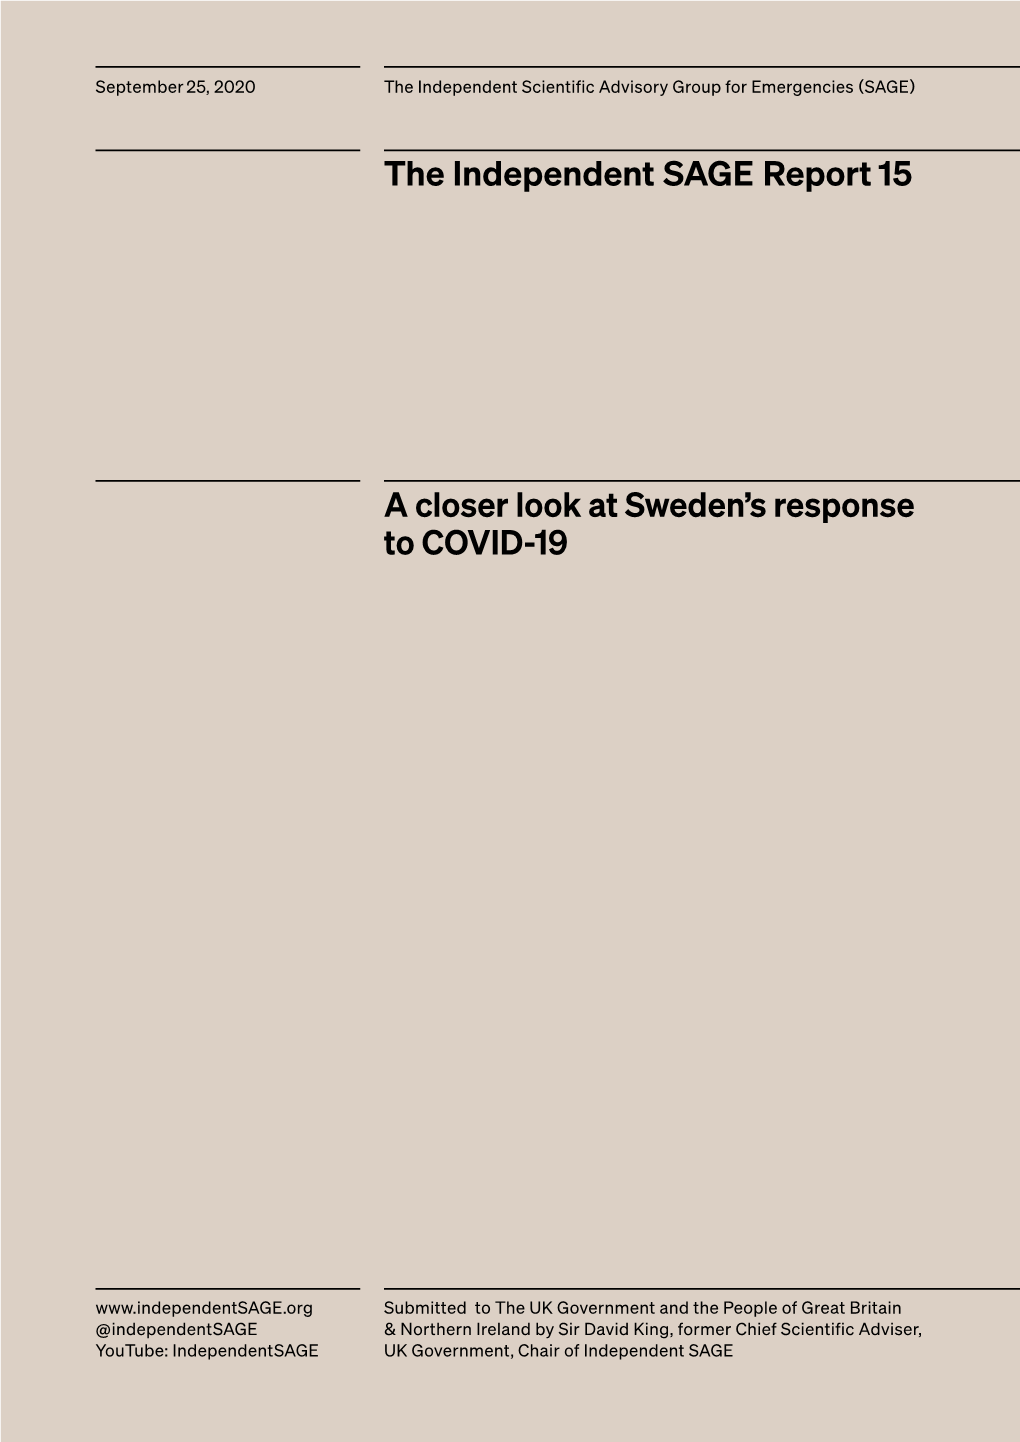 A Closer Look at Sweden's Response to COVID-19 the Independent SAGE